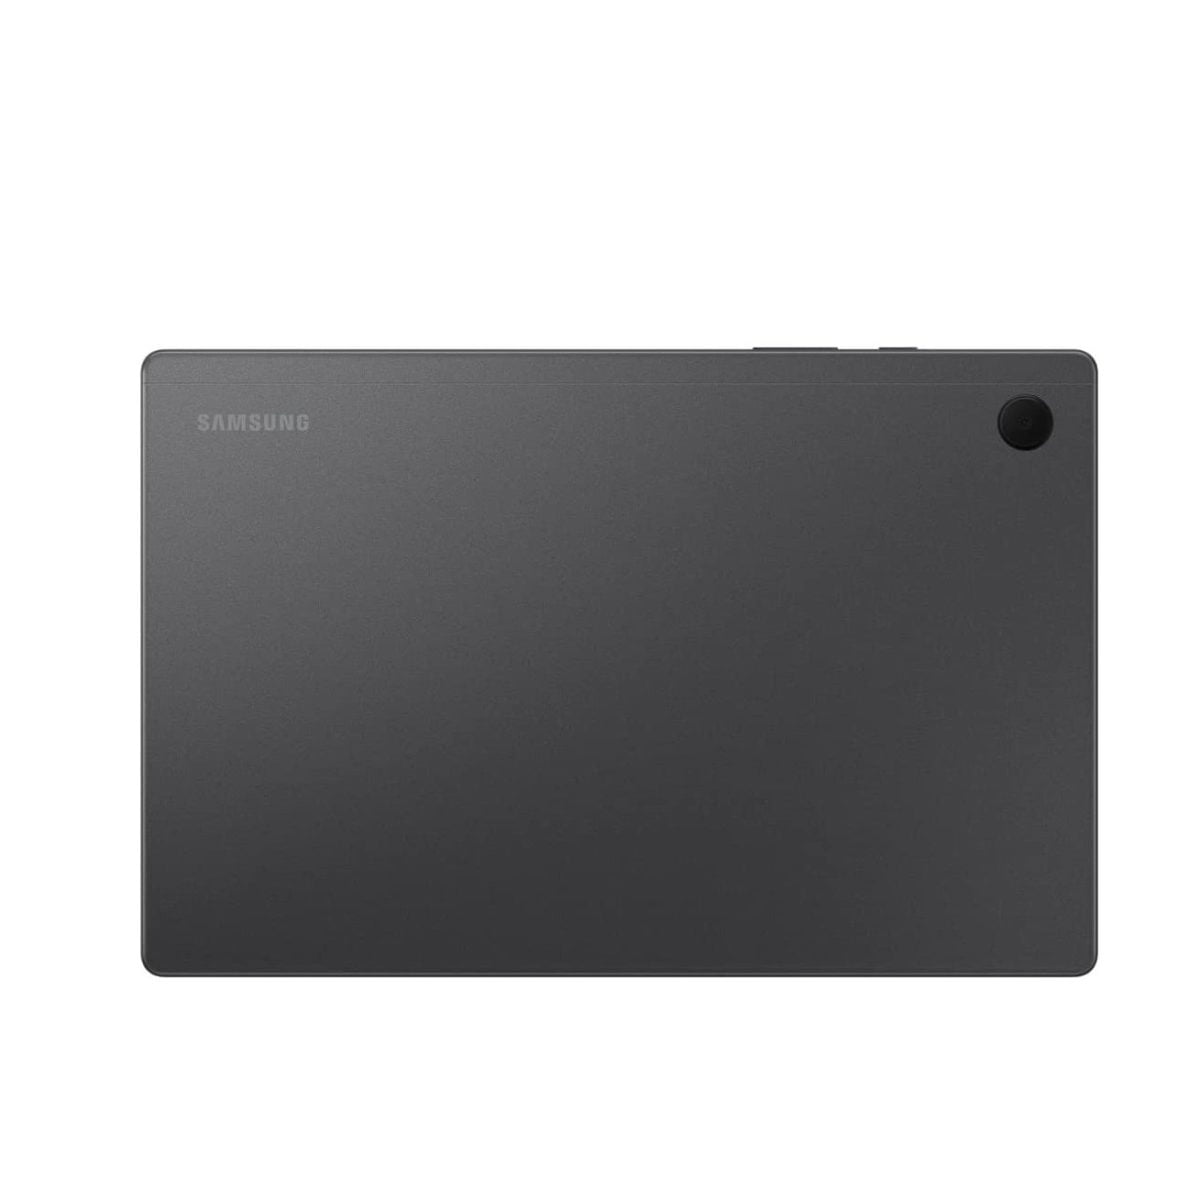 41Qddck4Jul. Ac Sl1200 Samsung &Lt;H1&Gt;Samsung Galaxy Tab A8 34Gb - ‎Dark Gray&Lt;/H1&Gt; &Lt;Ul Class=&Quot;A-Unordered-List A-Vertical A-Spacing-Mini&Quot;&Gt; &Lt;Li&Gt;&Lt;Span Class=&Quot;A-List-Item&Quot;&Gt;A Screen Everyone Will Love: Whether Your Family Is Streaming Or Video Chatting With Friends, The Galaxy Tab A8 Tablet Brings Out The Best In Every Moment On A 10.5&Quot; Lcd Screen&Lt;/Span&Gt;&Lt;/Li&Gt; &Lt;Li&Gt;&Lt;Span Class=&Quot;A-List-Item&Quot;&Gt;Power And Storage For All: Get The Power, Storage And Speed Your Family Needs With An Upgraded Chipset And Plenty Of Room To Keep Files — Up To 128Gb Of Storage; A Long-Lasting Battery Lets You Go Unplugged For Hours To Keep The Family Fun Going&Lt;/Span&Gt;&Lt;/Li&Gt; &Lt;Li&Gt;&Lt;Span Class=&Quot;A-List-Item&Quot;&Gt;Charge Fast, Power For Hours: Go For Hours On A Single Charge* And Back To 100% With The Fast Charging Usb C Port; *Battery Life May Vary Depending On Network Environment, Usage Patterns And Other Factors&Lt;/Span&Gt;&Lt;/Li&Gt; &Lt;Li&Gt;&Lt;Span Class=&Quot;A-List-Item&Quot;&Gt;Galaxy Ecosystem Experience: Open Up A New World Of Convenient Possibilities With The Galaxy Ecosystem Experience — Your Devices, Including Your Phone, Laptop Computer, And Tablet, All Automatically Talk To One Another Seamlessly&Lt;/Span&Gt;&Lt;/Li&Gt; &Lt;Li&Gt;&Lt;Span Class=&Quot;A-List-Item&Quot;&Gt;Your Notes, All In One Place: Do More With Your Notes With Galaxy Connectivity That Automatically Syncs Everything From To-Do Lists To School Work, Whether You’re On Your Tablet, Phone Or Watch&Lt;/Span&Gt;&Lt;/Li&Gt; &Lt;Li&Gt;&Lt;Span Class=&Quot;A-List-Item&Quot;&Gt;Kids Digital Learning: Children Can Enjoy Access To Samsung Kids, A Library Of Safe And Fun Games, Books And Videos That Are Kid Friendly And Parent Approved&Lt;/Span&Gt;&Lt;/Li&Gt; &Lt;Li&Gt;&Lt;Span Class=&Quot;A-List-Item&Quot;&Gt;Easiest. Transfer. Ever: No Matter What Operating System You'Re Using, Smart Switch Makes It A Breeze To Move Your Data And Favorite Files In Three Easy Steps&Lt;/Span&Gt;&Lt;/Li&Gt; &Lt;/Ul&Gt; Galaxy Tab Samsung Galaxy Tab A8 32Gb - ‎Dark Gray